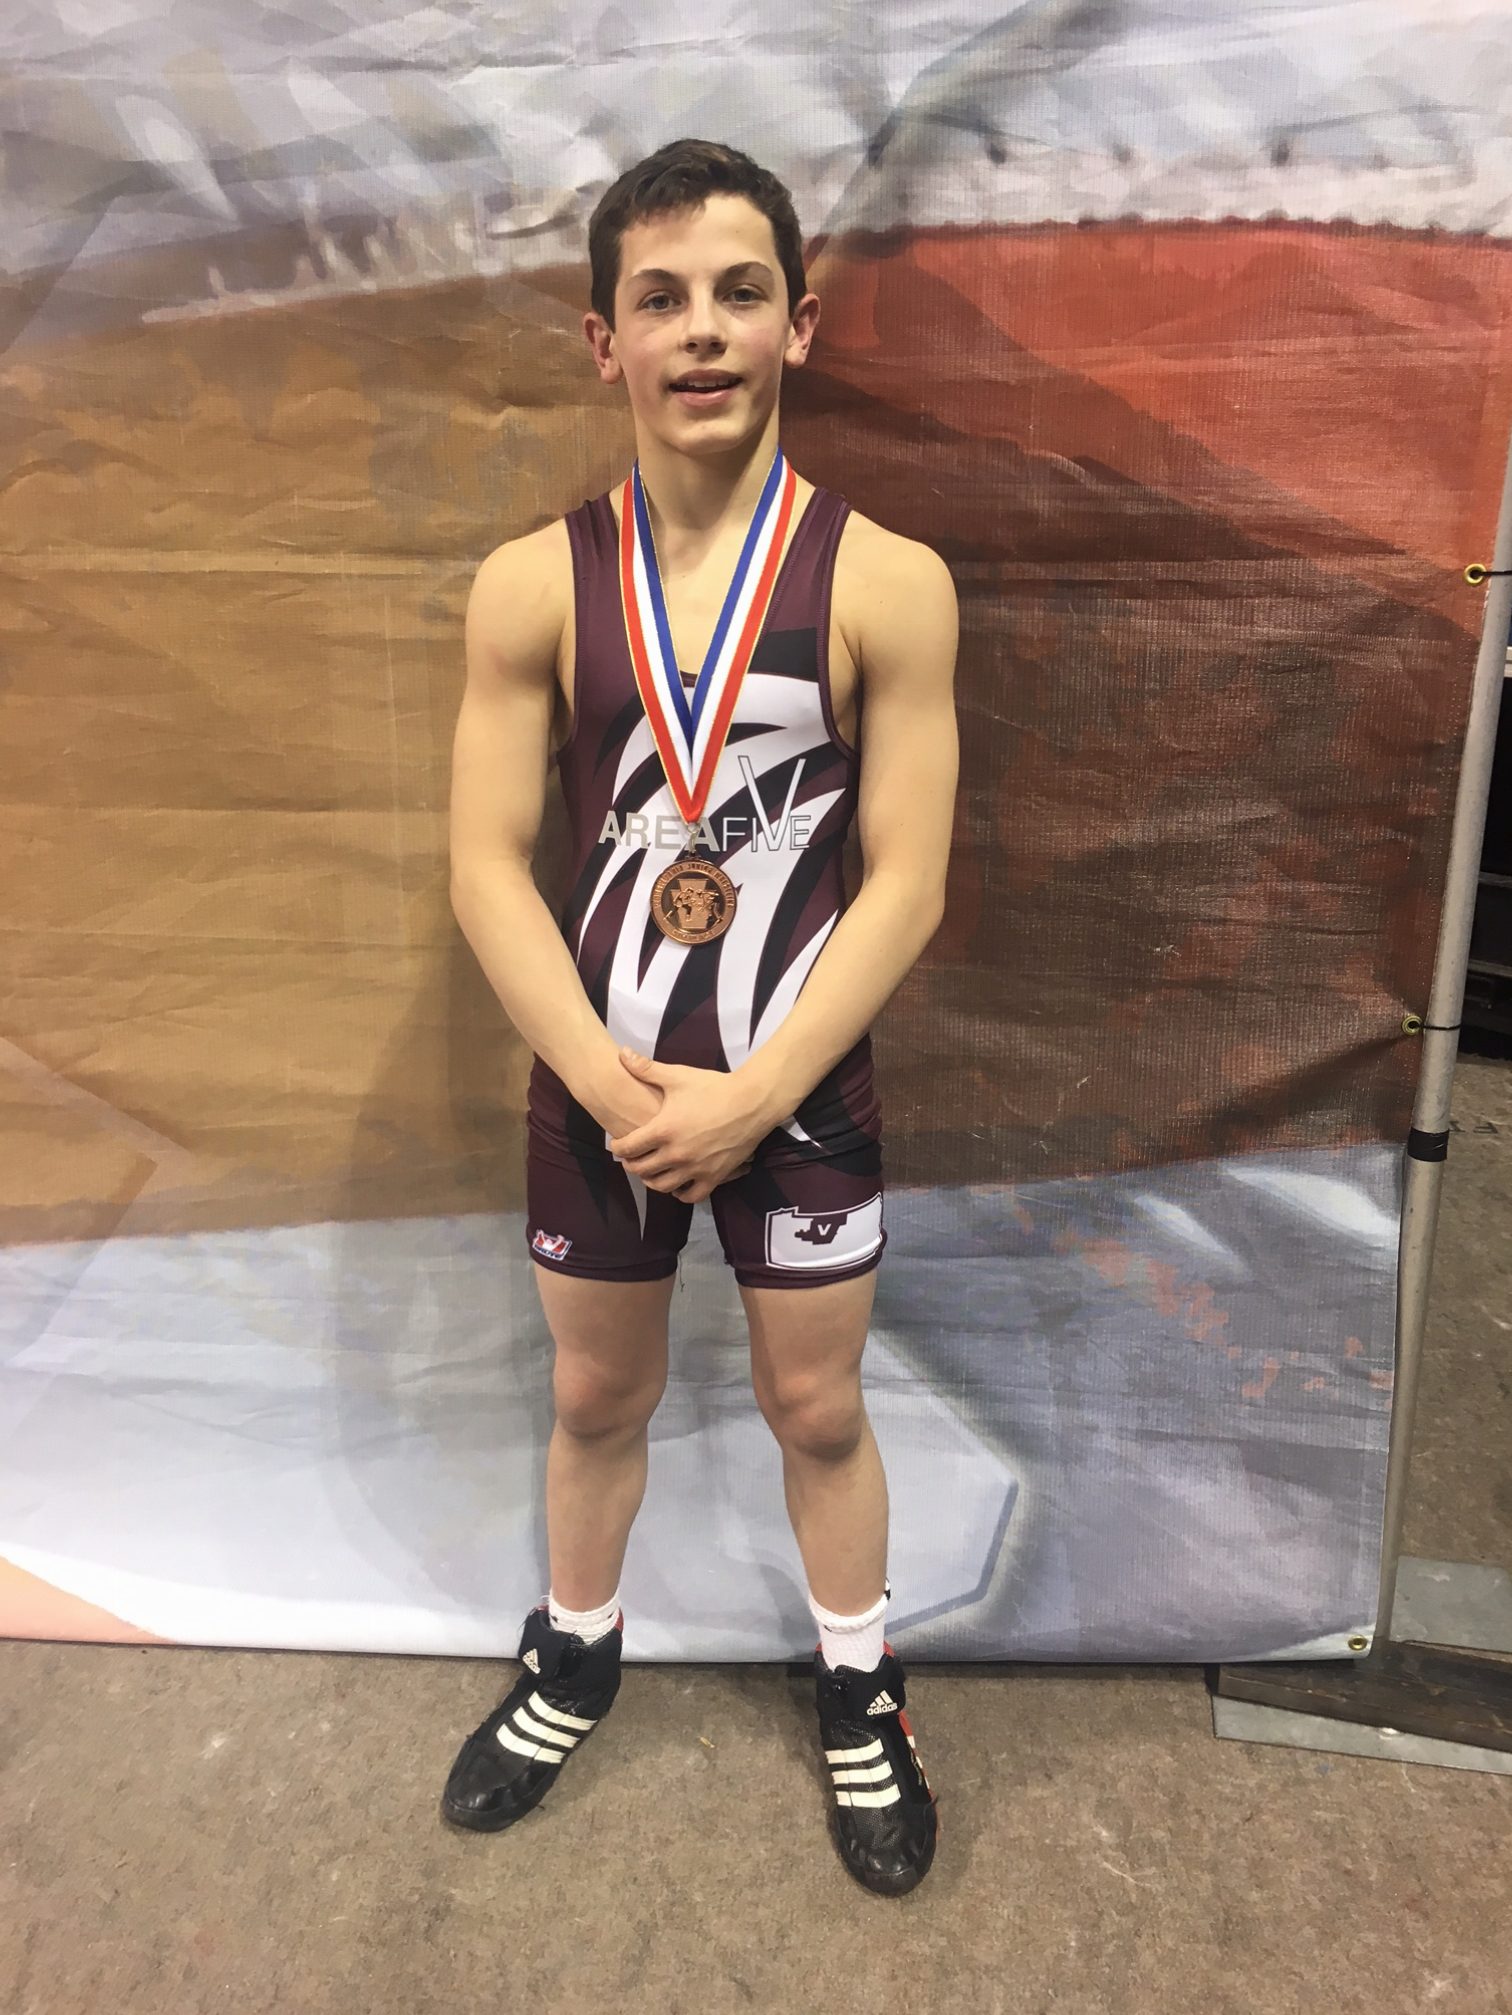 Mark McGonigal took 5th place at the PJW Youth State Championships